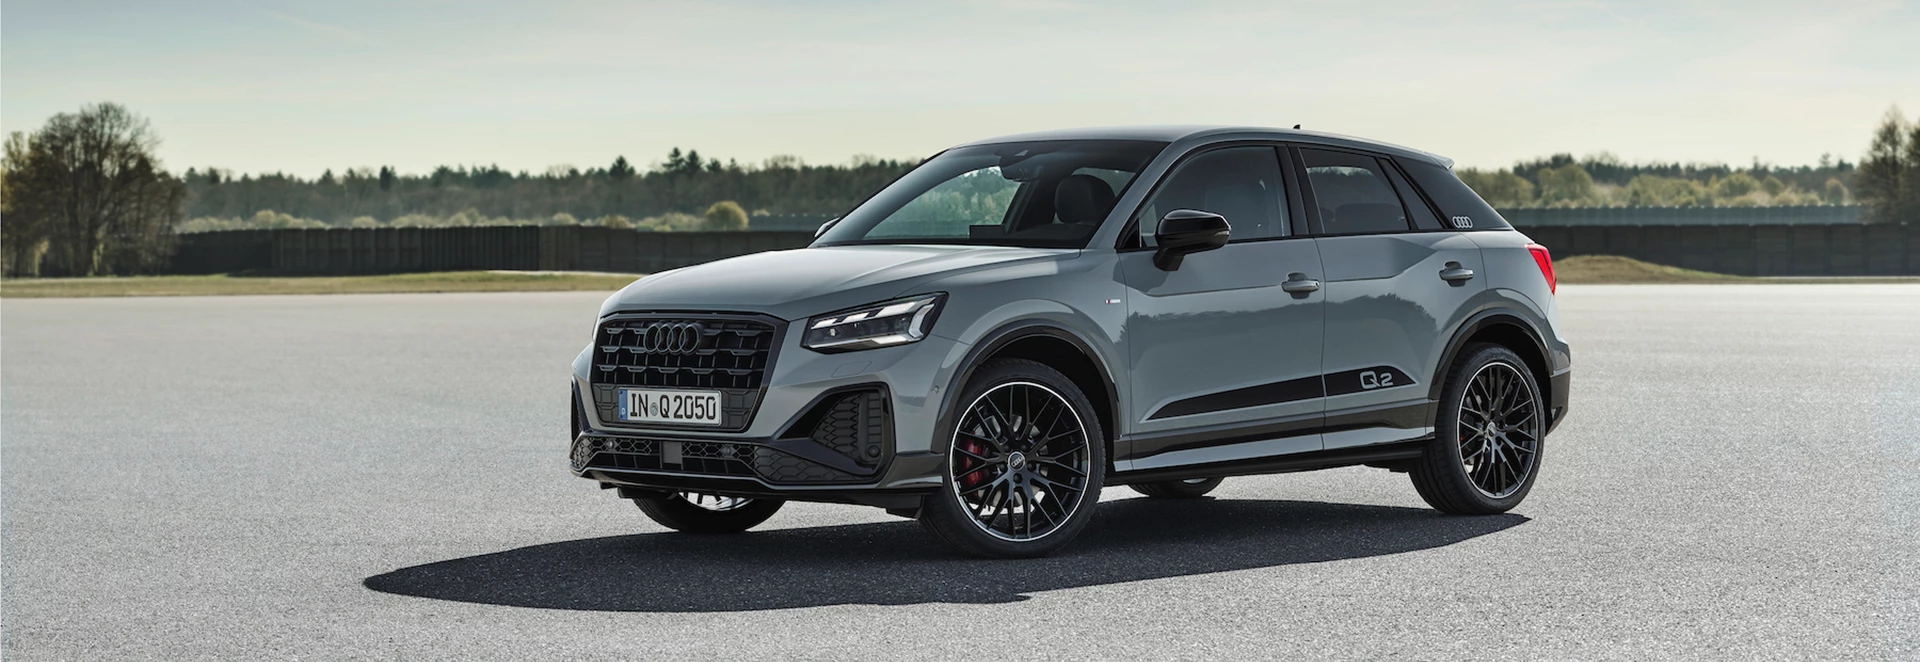 Audi updates baby Q2 crossover with new design and additional technology 